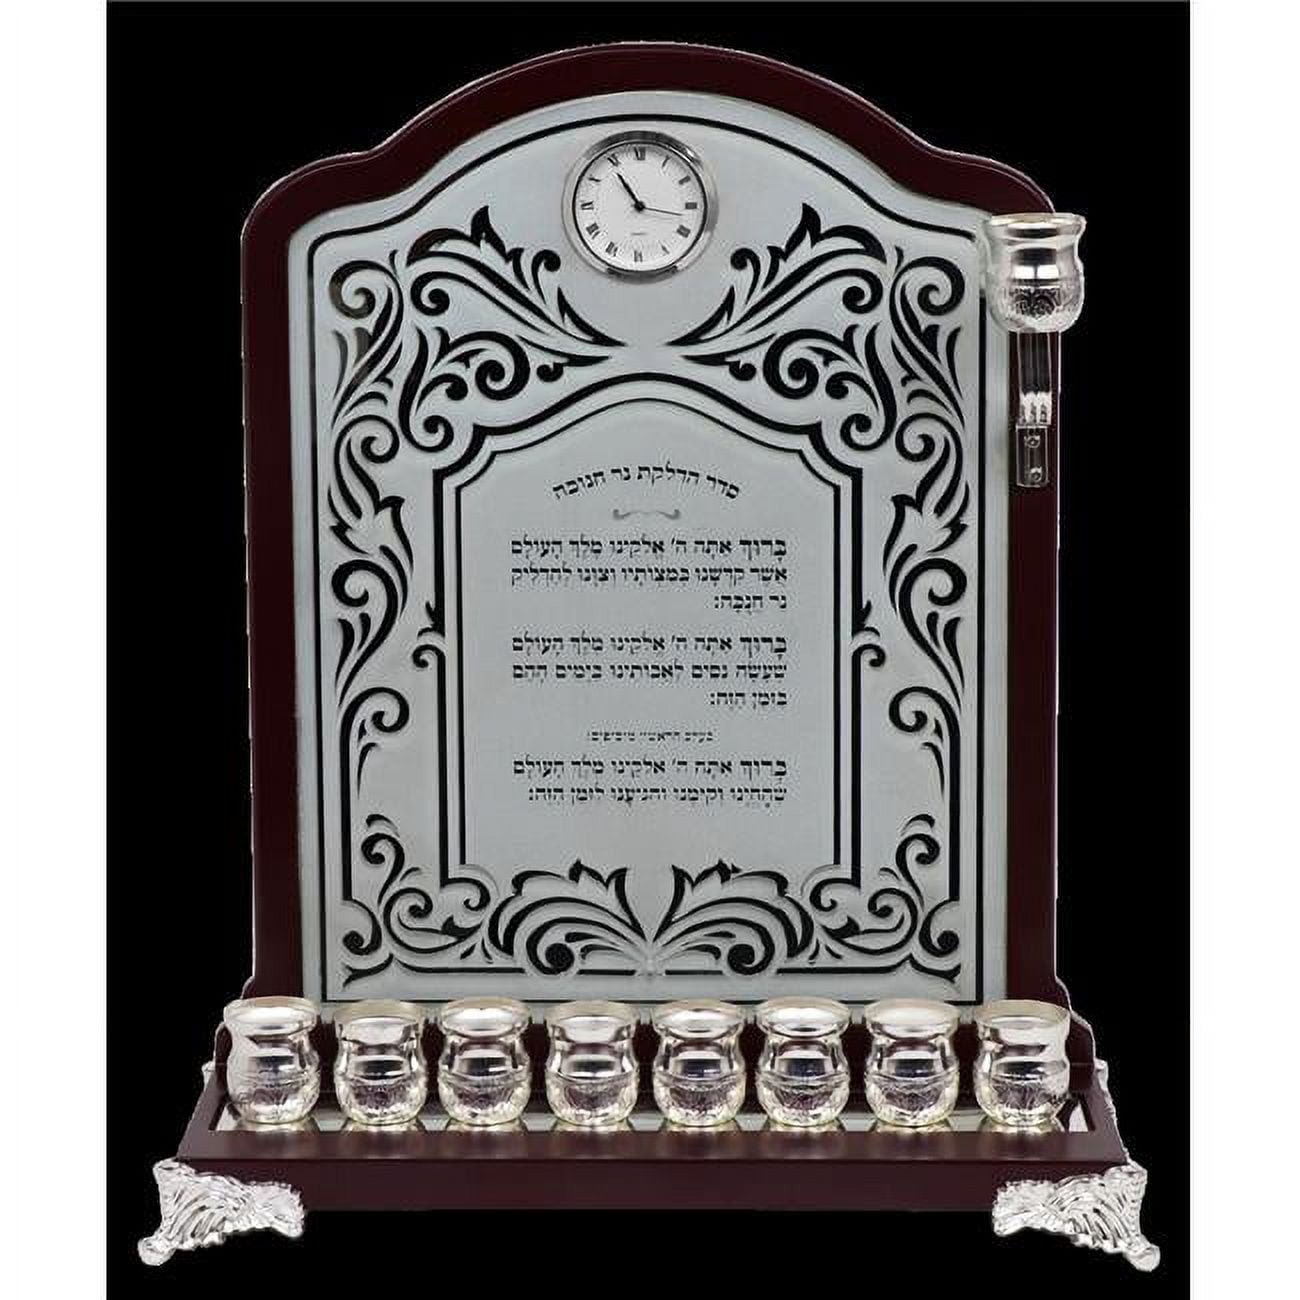 Picture of Nua 59010 14 x 9.5 in. Mahogany Wall Menorah with Clock Brachot for Chanukah Candle Lighting on Mirror